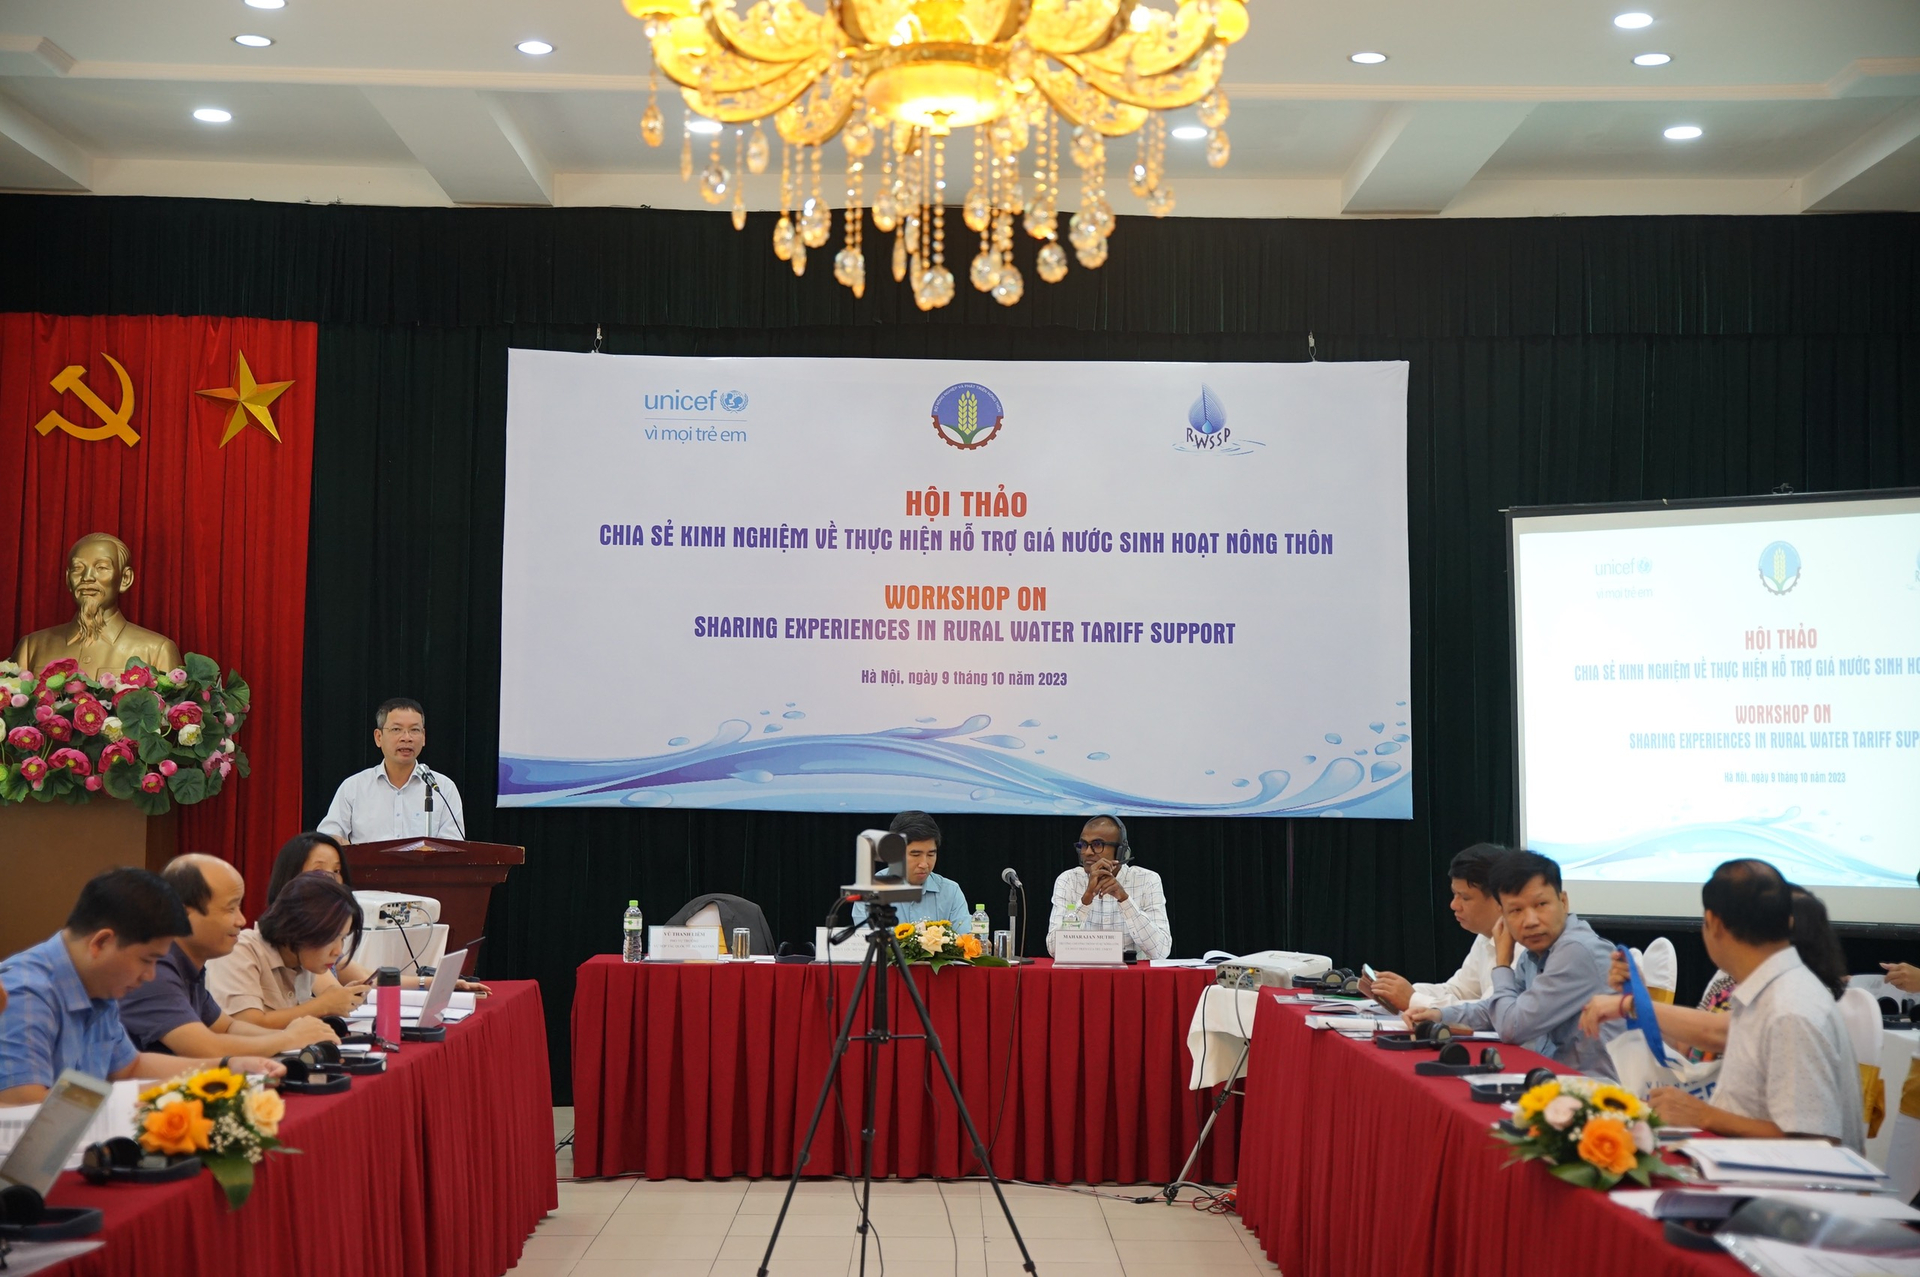 On October 9, ICD in collaboration with the Department of Water Resources (MARD) and UNICEF organized a Workshop on Sharing experiences in rural water tariff support.